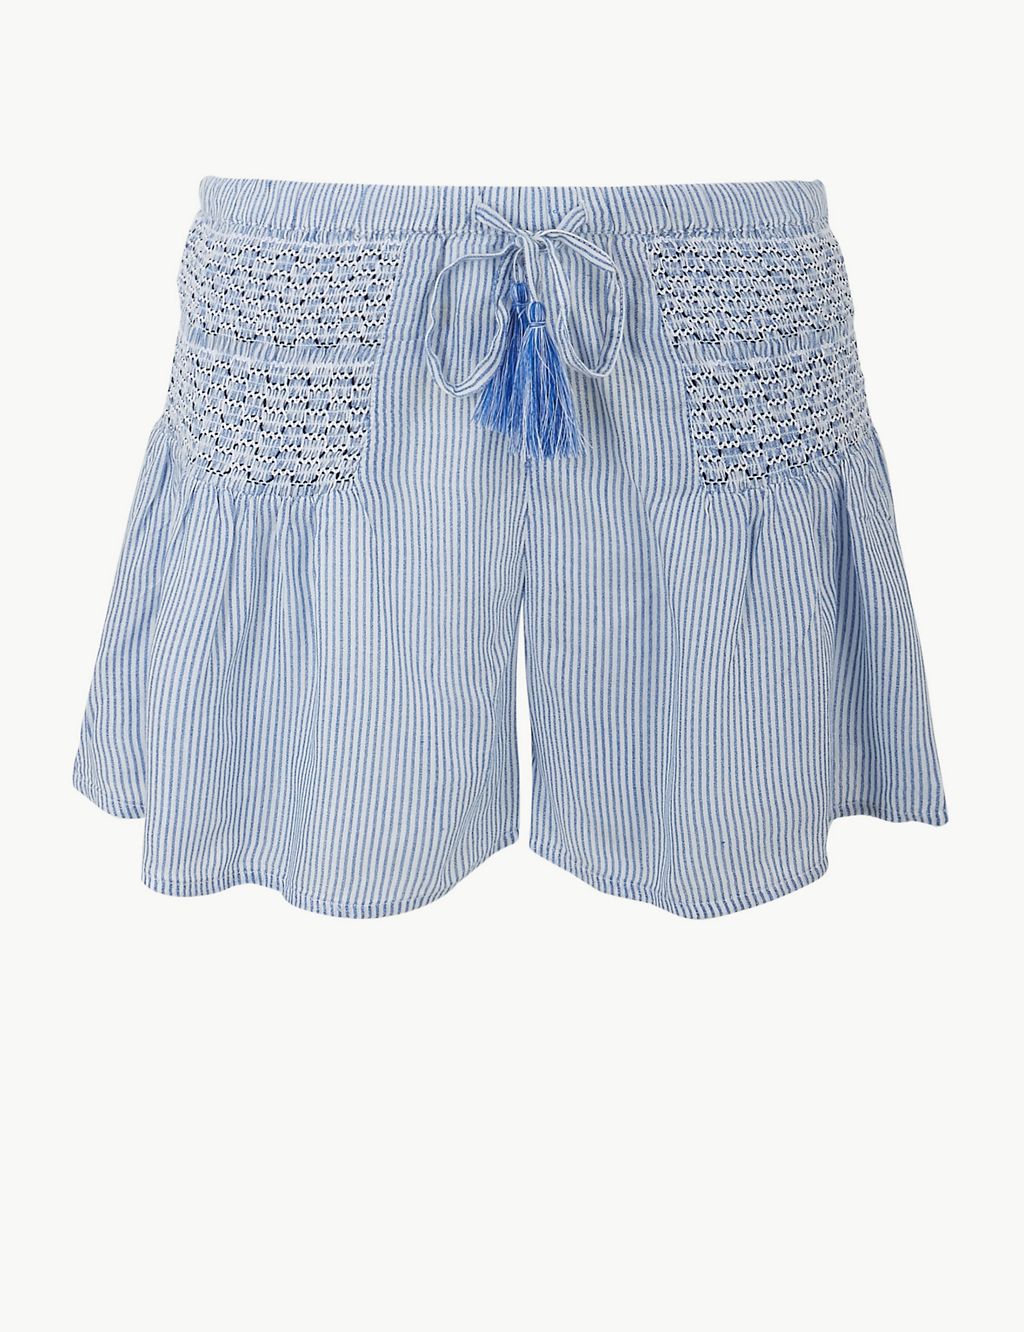 Embroidered Beach Shorts 1 of 5